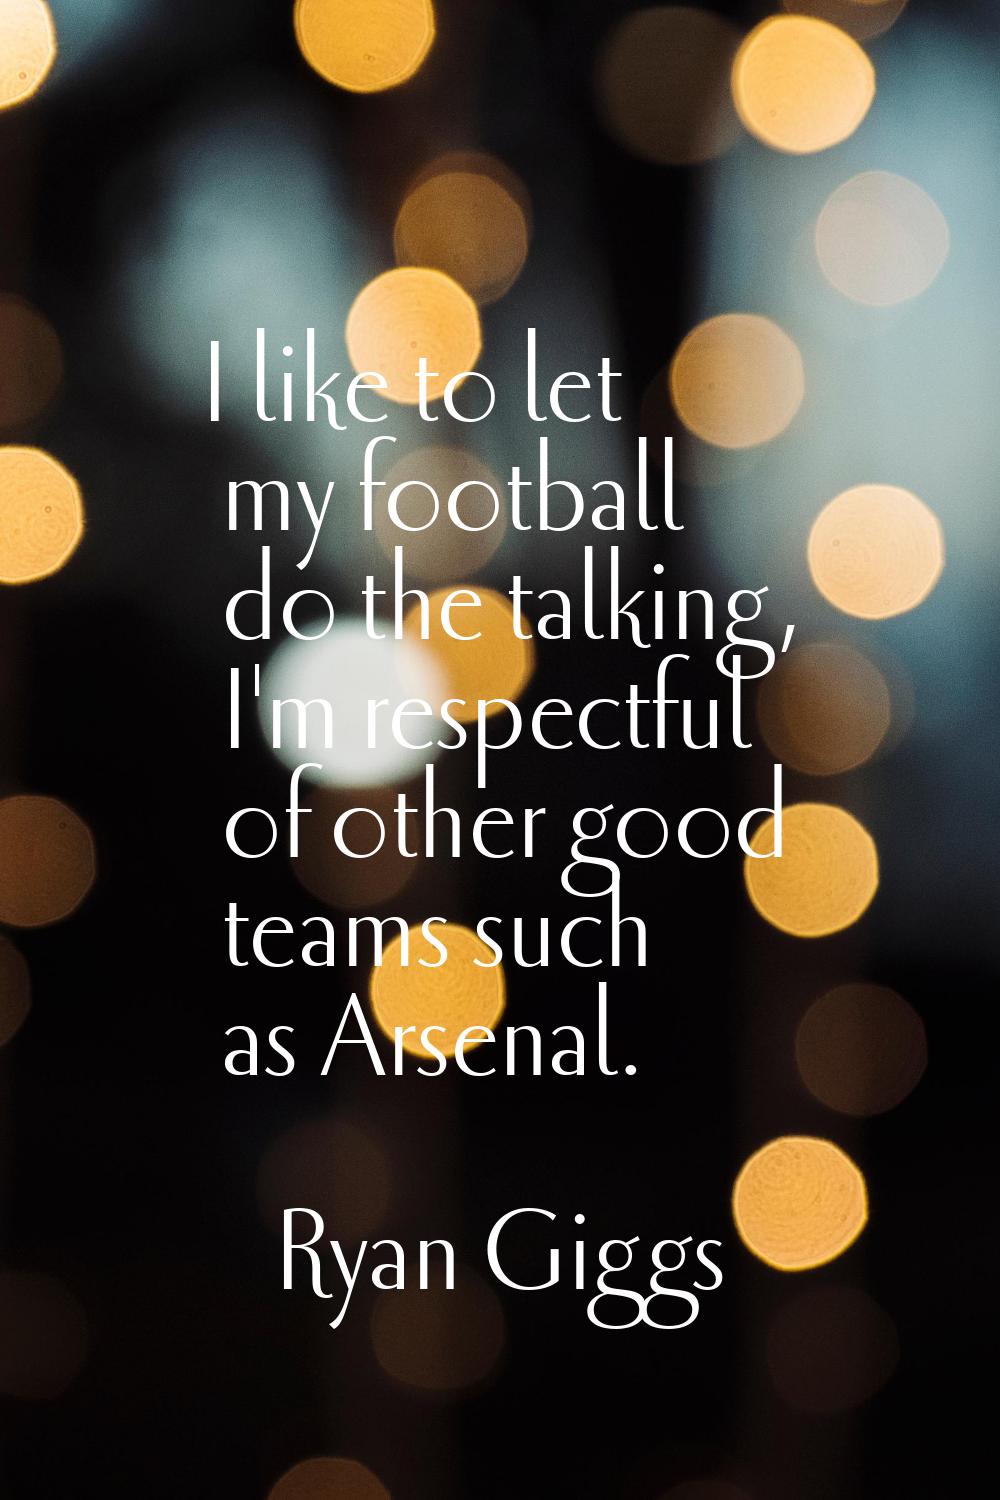 I like to let my football do the talking, I'm respectful of other good teams such as Arsenal.